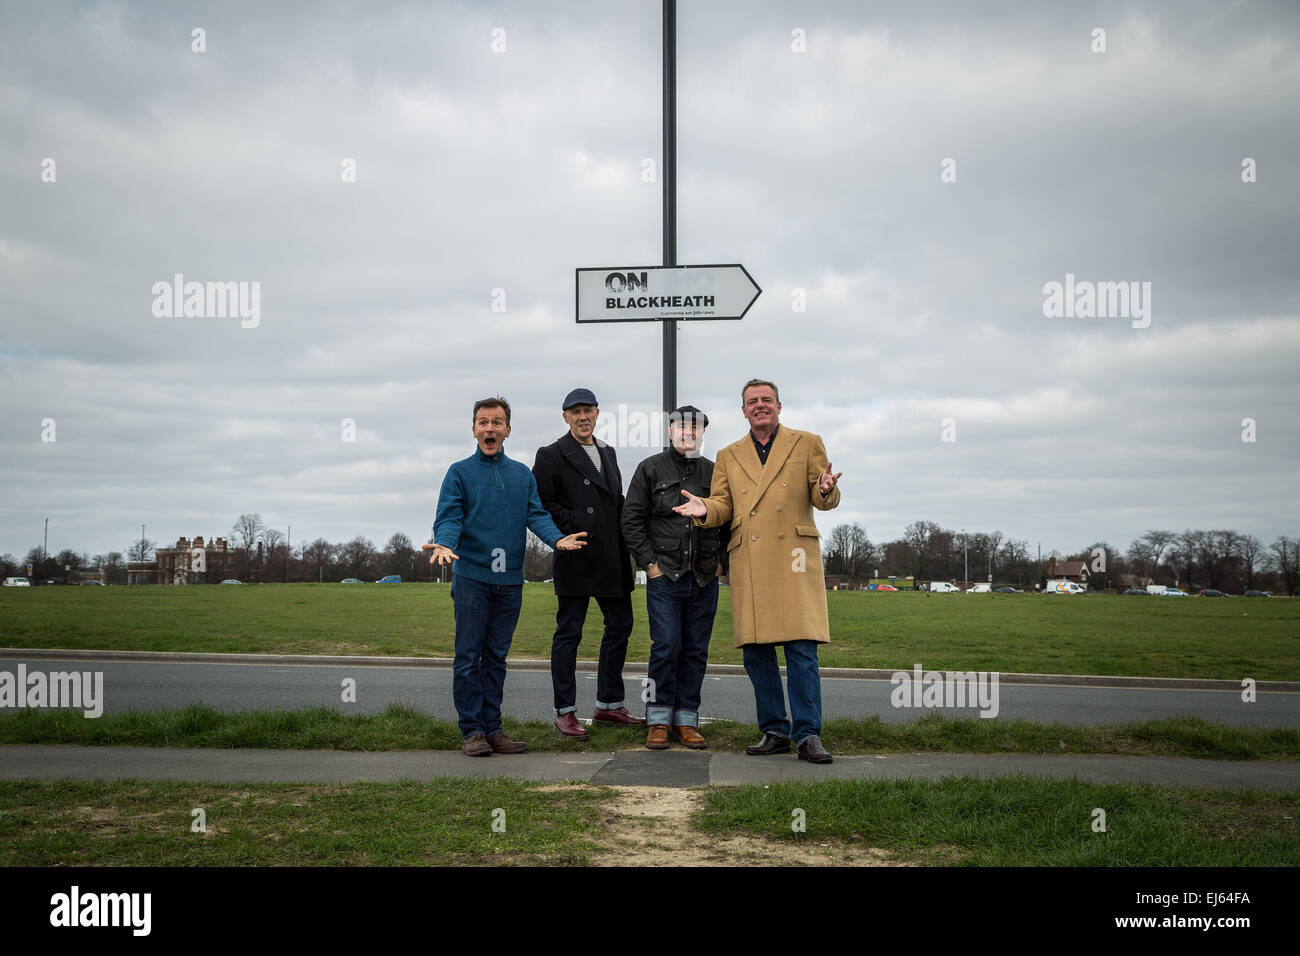 London, UK. 22nd March, 2015. Madness band photocall for OnBlackheath Festival Credit:  Guy Corbishley/Alamy Live News Stock Photo